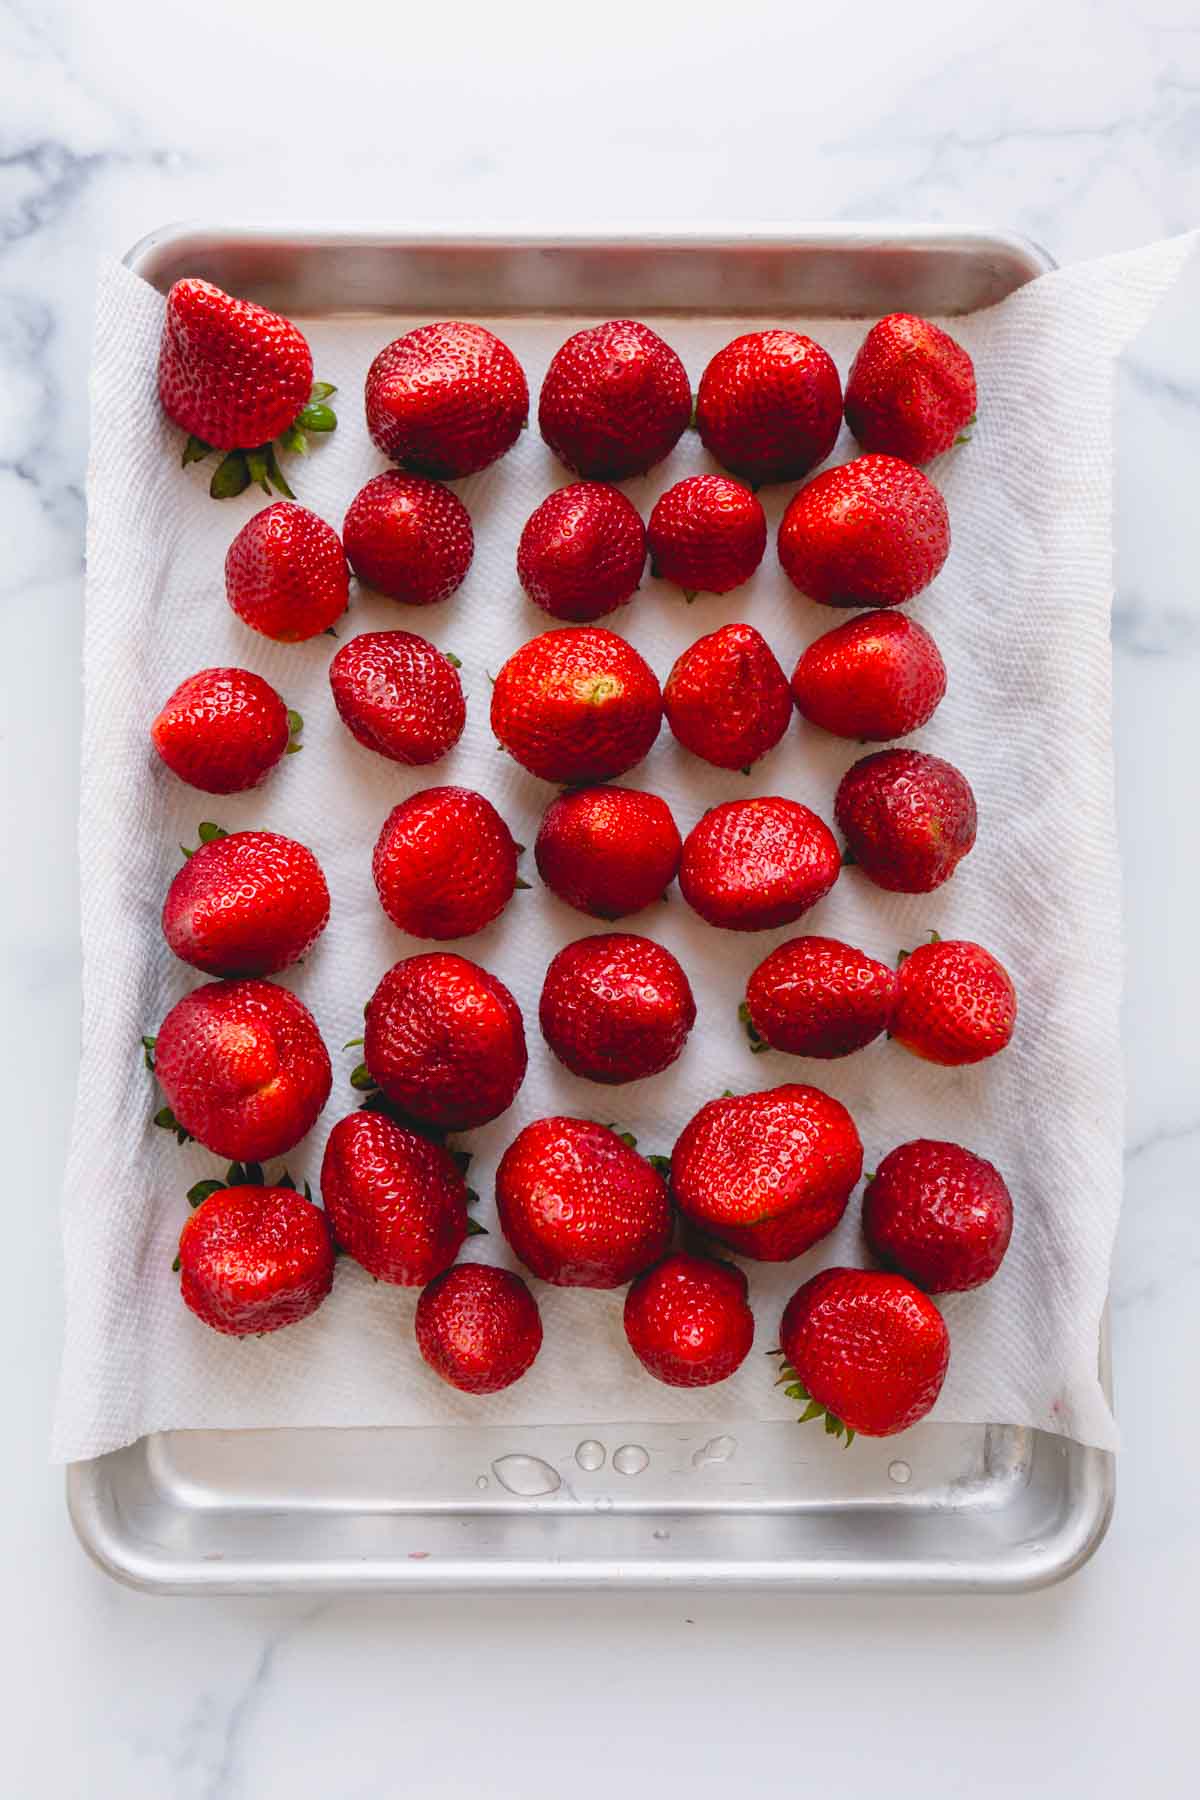 Clean strawberries on top of a paper towel-lined baking sheet.